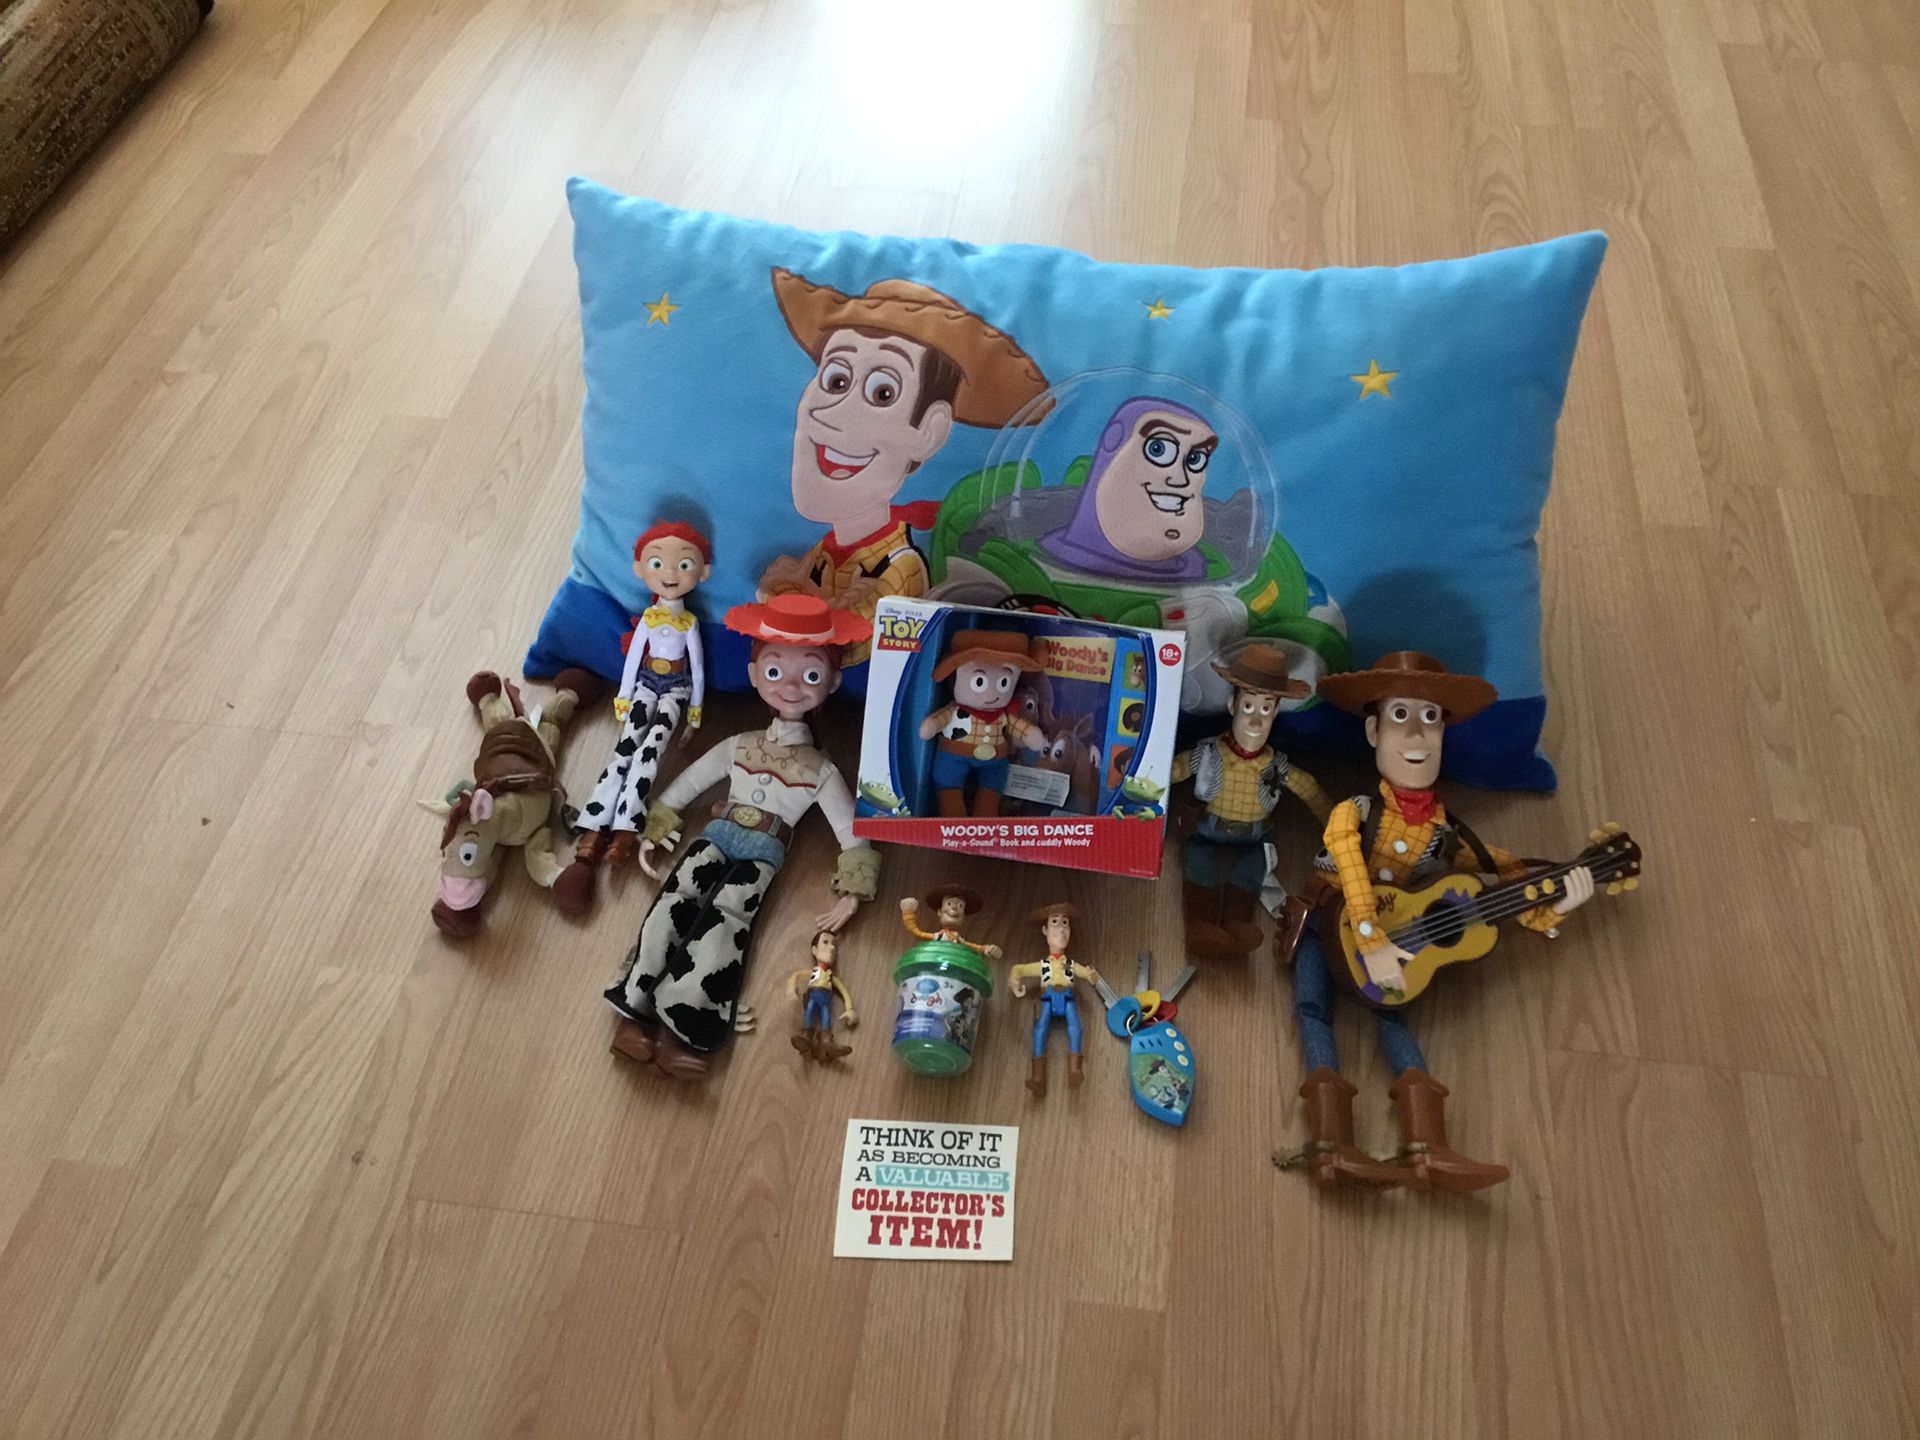 Toy Story 1 collectibles